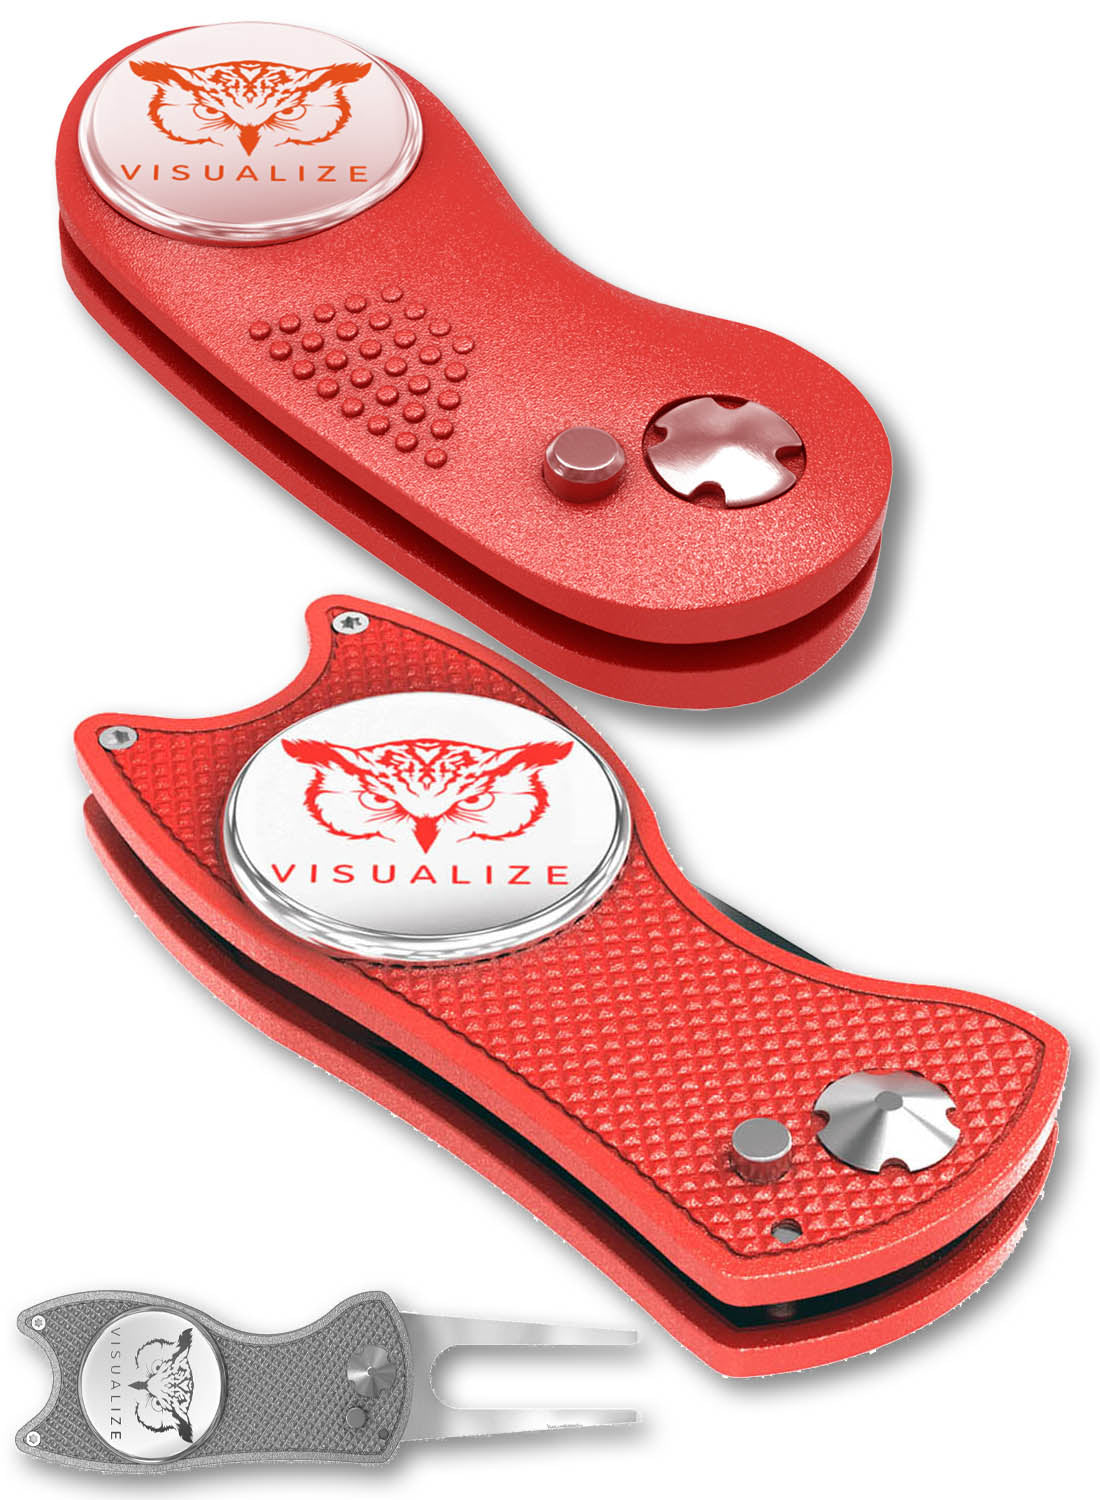 2 visualize divot tools closed, and one open. 